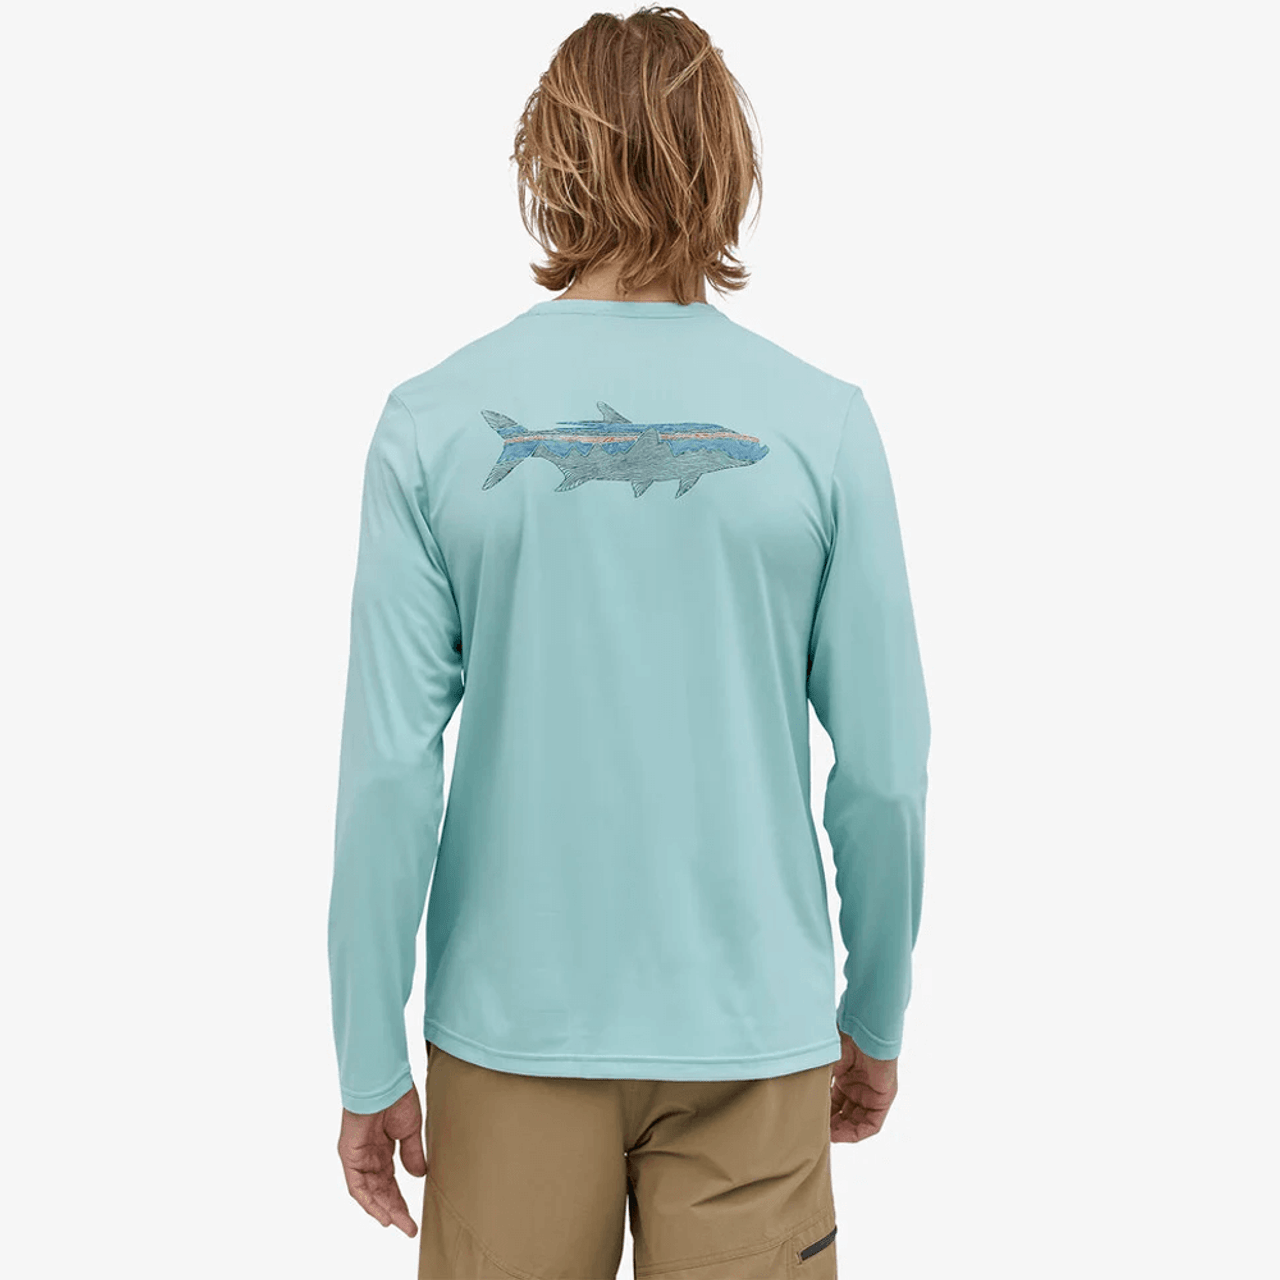 https://cdn11.bigcommerce.com/s-zut1msomd6/images/stencil/1280x1280/products/18841/190331/mens-patagonia-long-sleeve-capilene-cool-daily-fish-graphic-tee-52147-wofi-woodgrainfitz-back__88546.1614953128.png?c=1